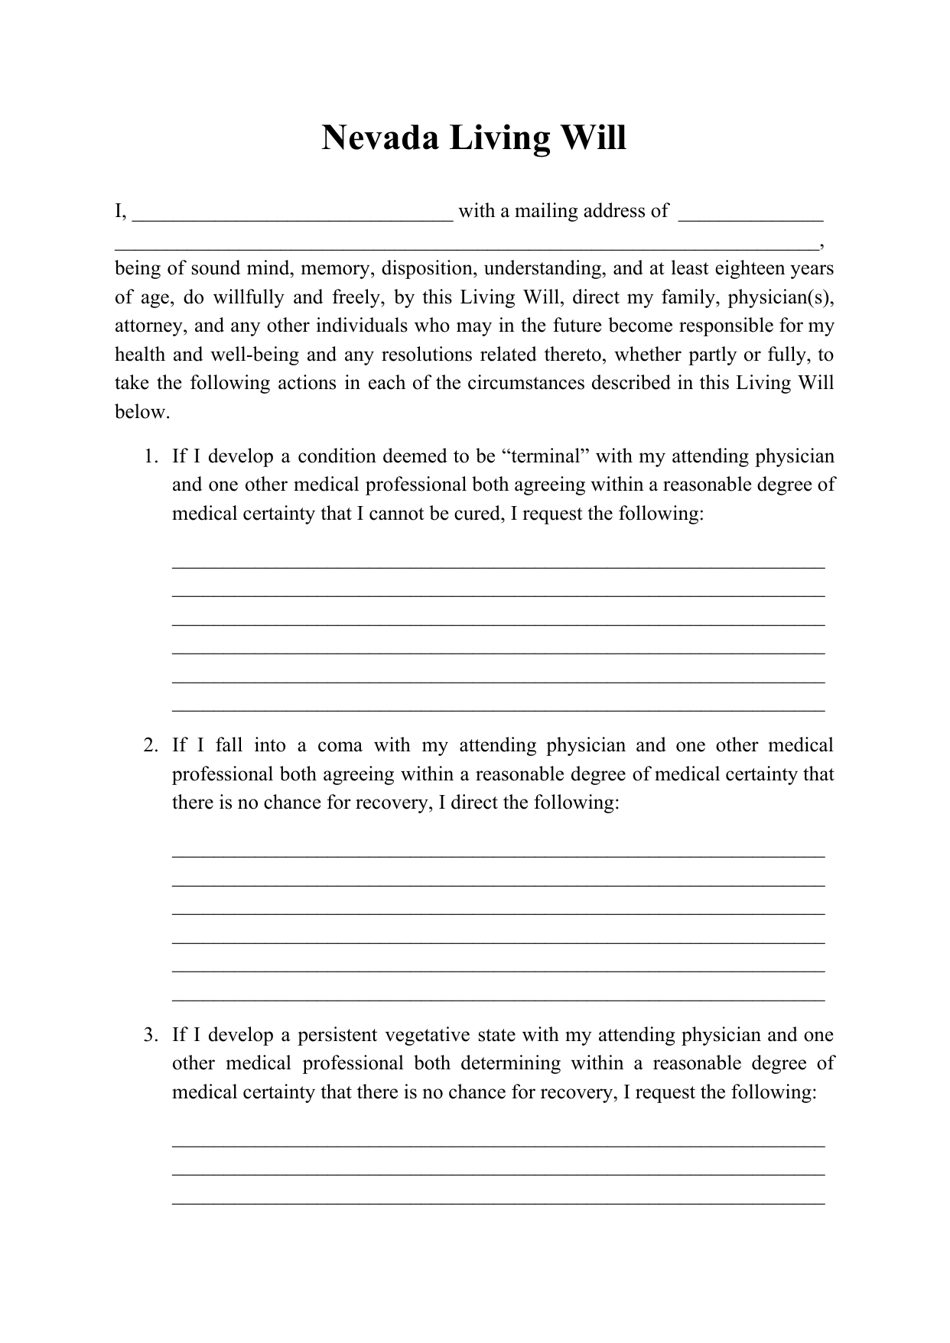 nevada-living-will-form-fill-out-sign-online-and-download-pdf